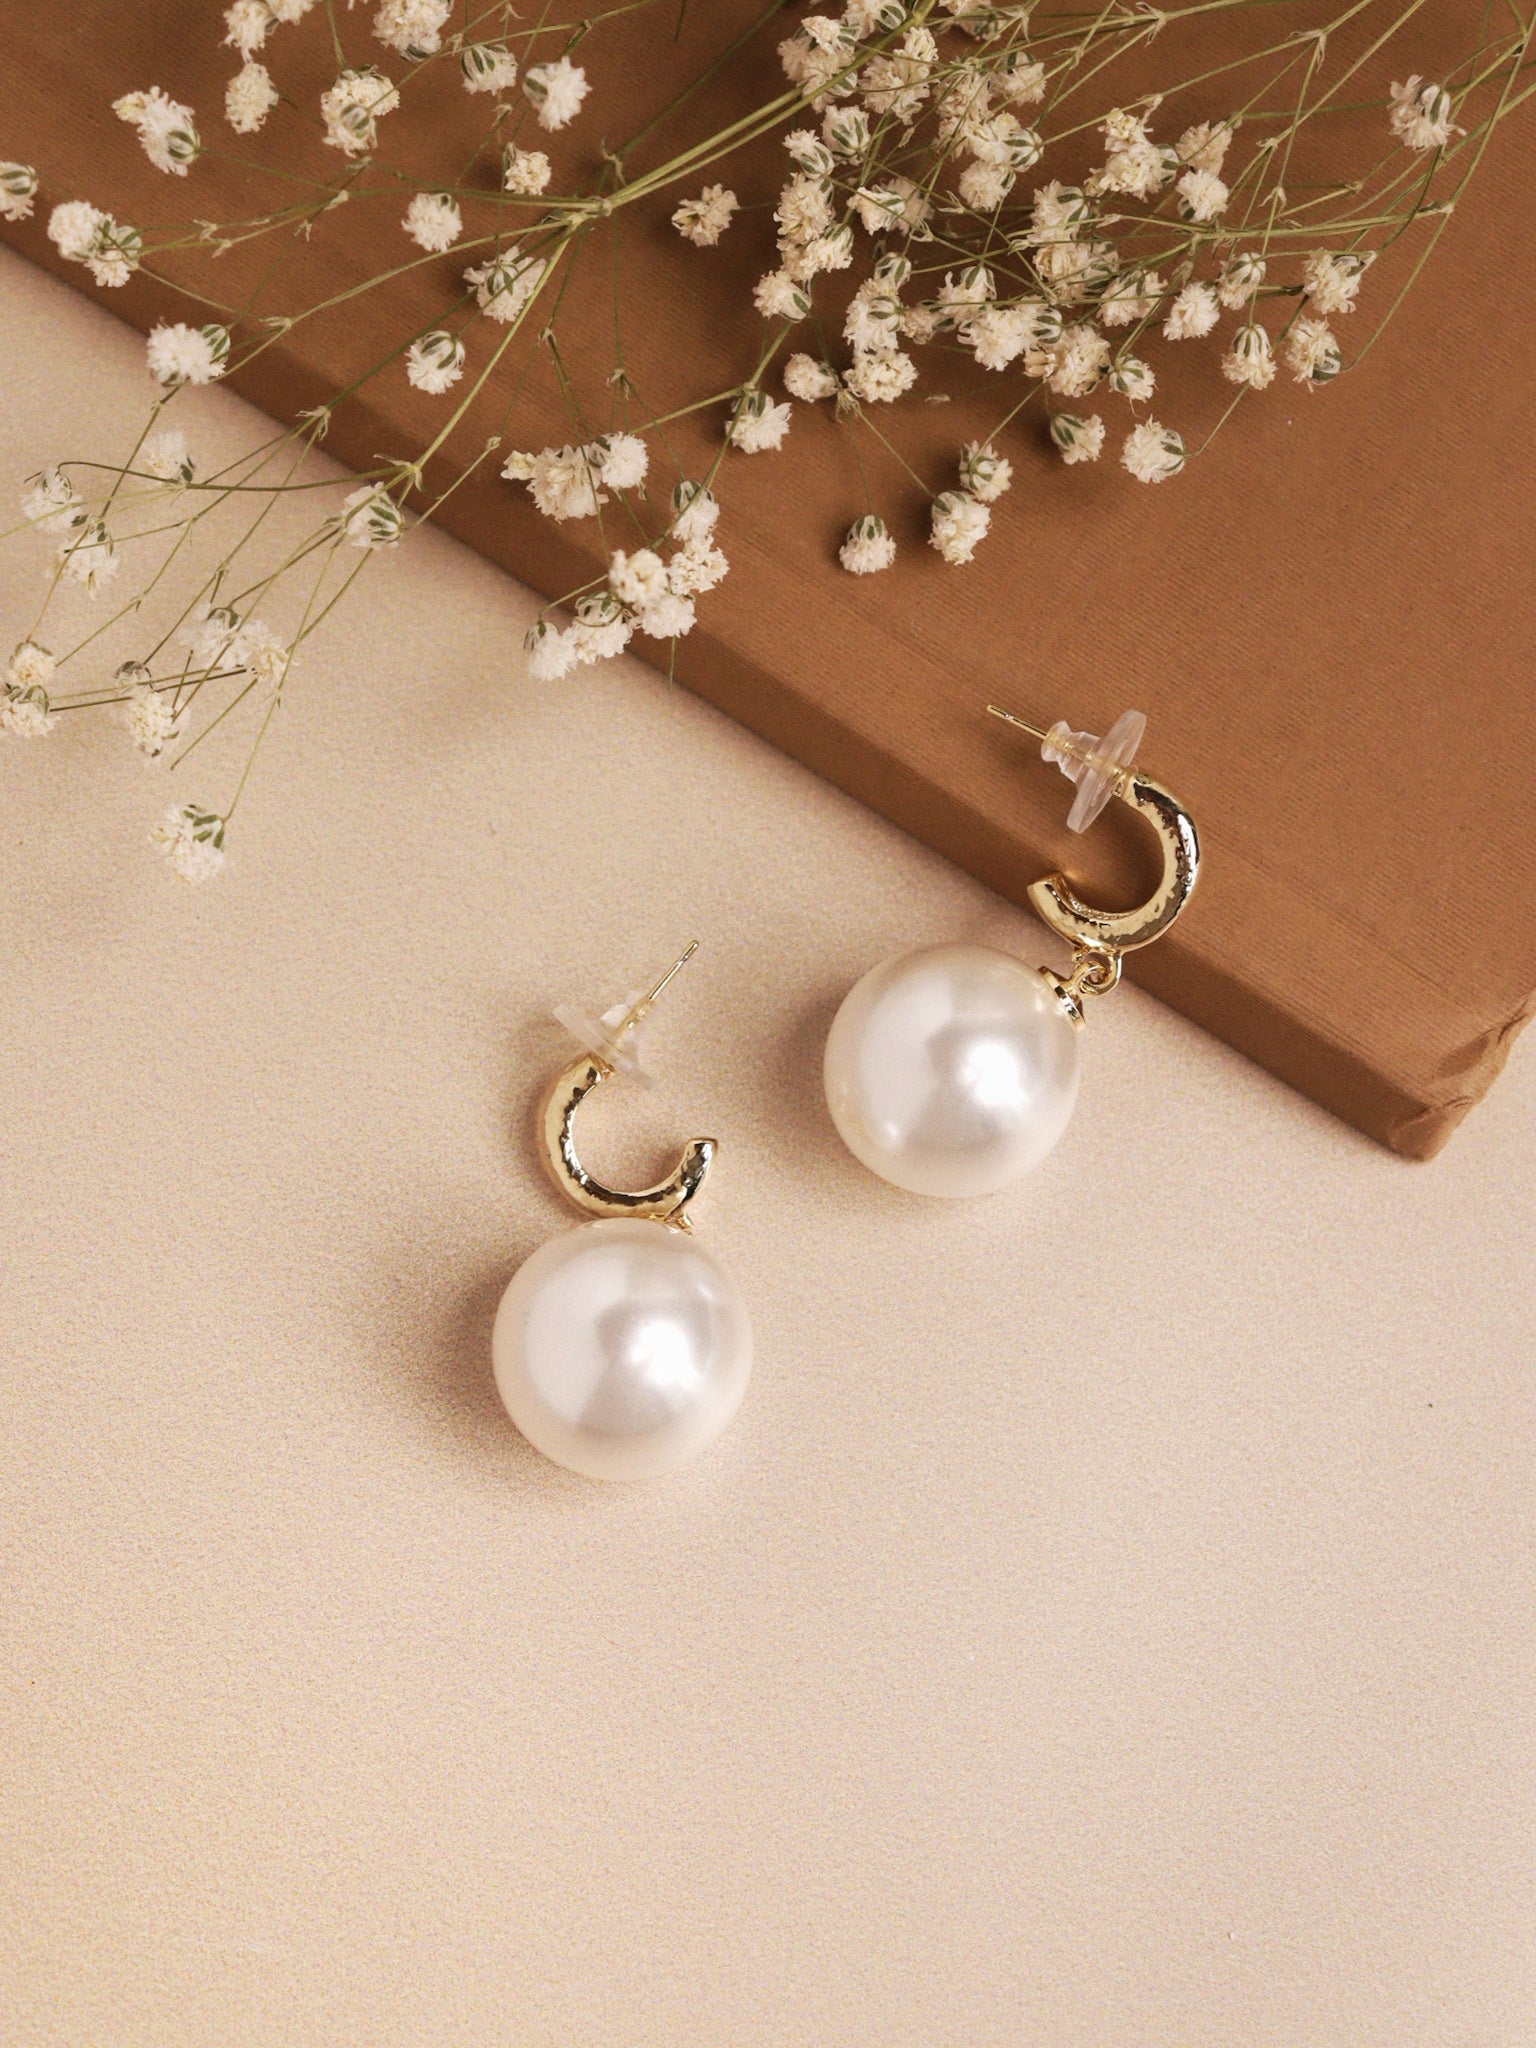 Floral White Pearl Earrings Gold Plated Jadau Studs Collections ER3788